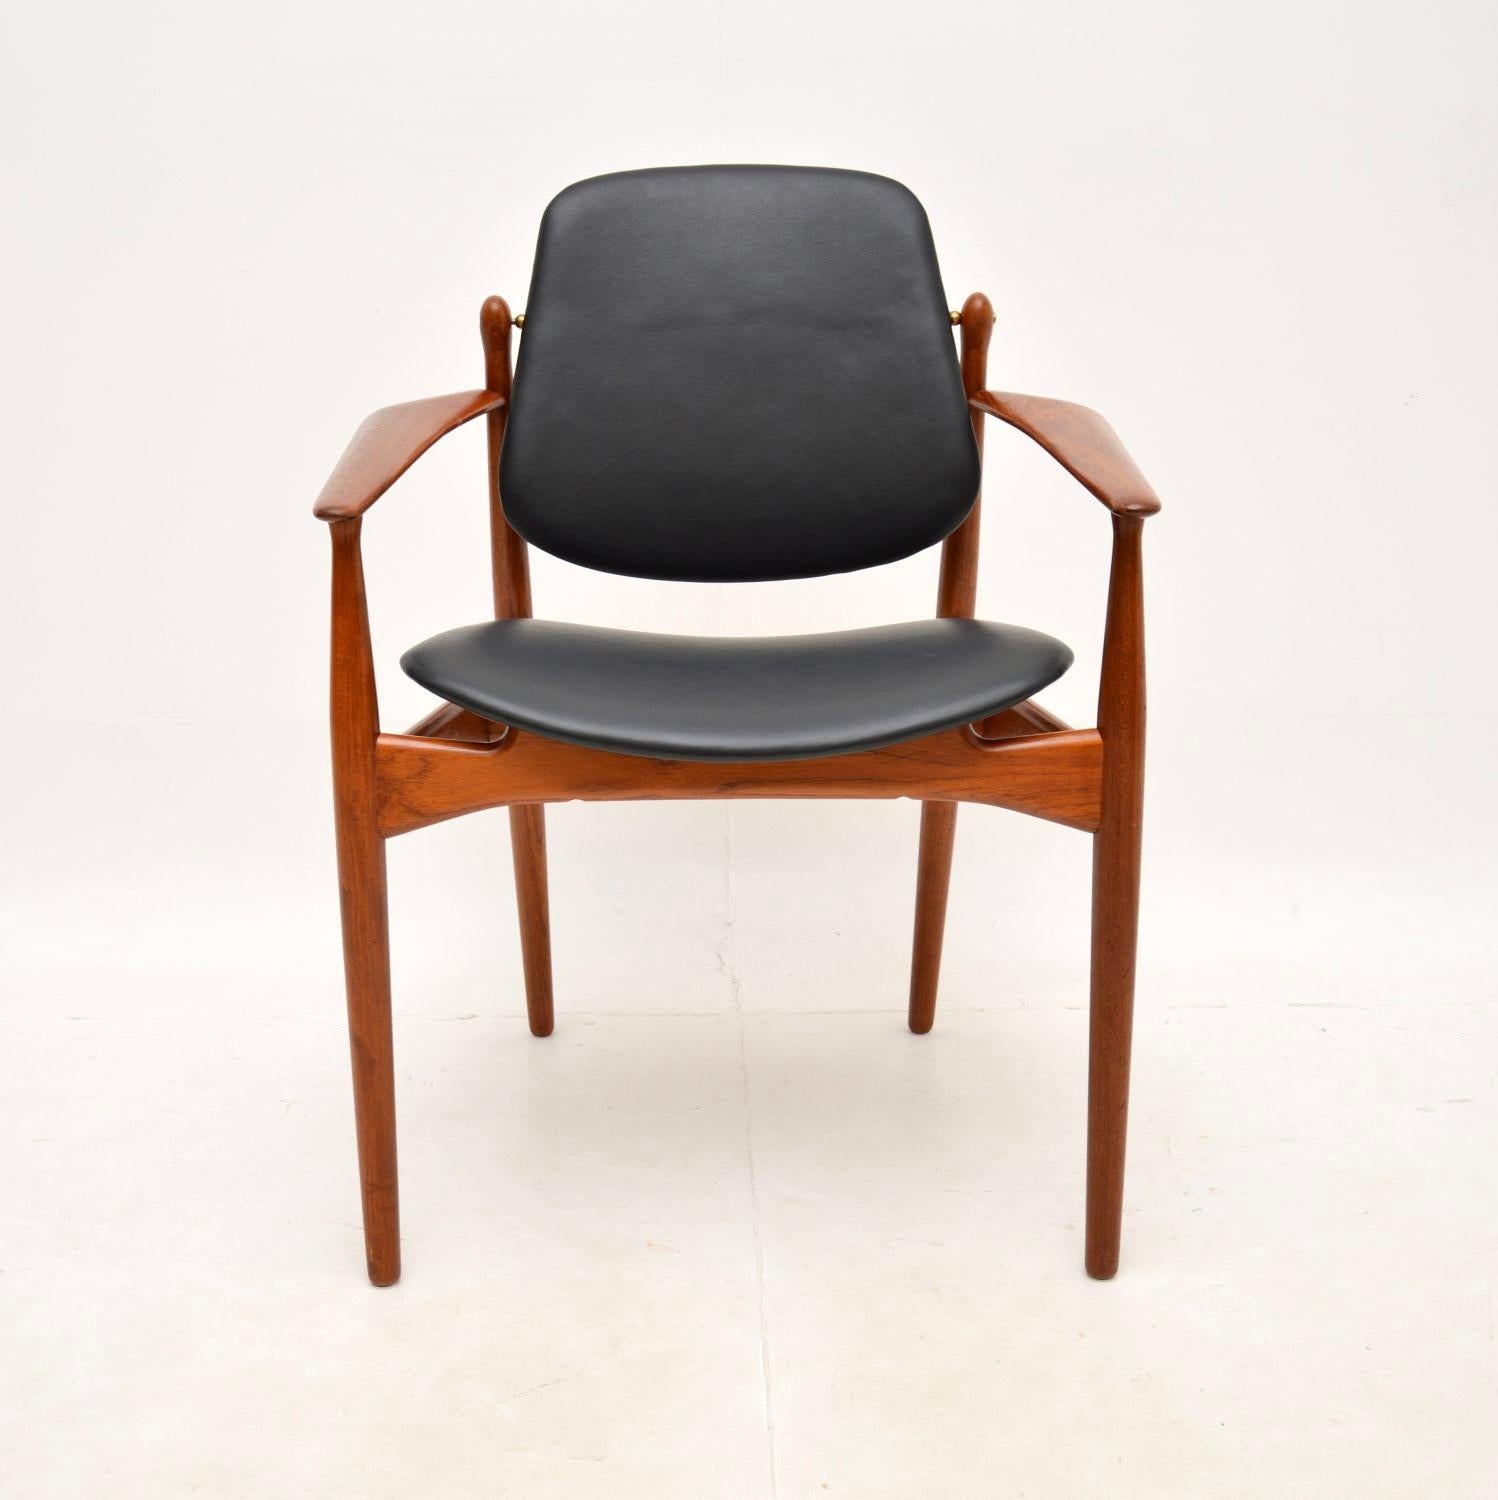 A beautiful and iconic Danish vintage teak and leather armchair by Arne Vodder. This was made in Denmark by France and Son, it dates from the 1960’s.

The quality is outstanding, this is so well made and it is extremely comfortable. It is a great